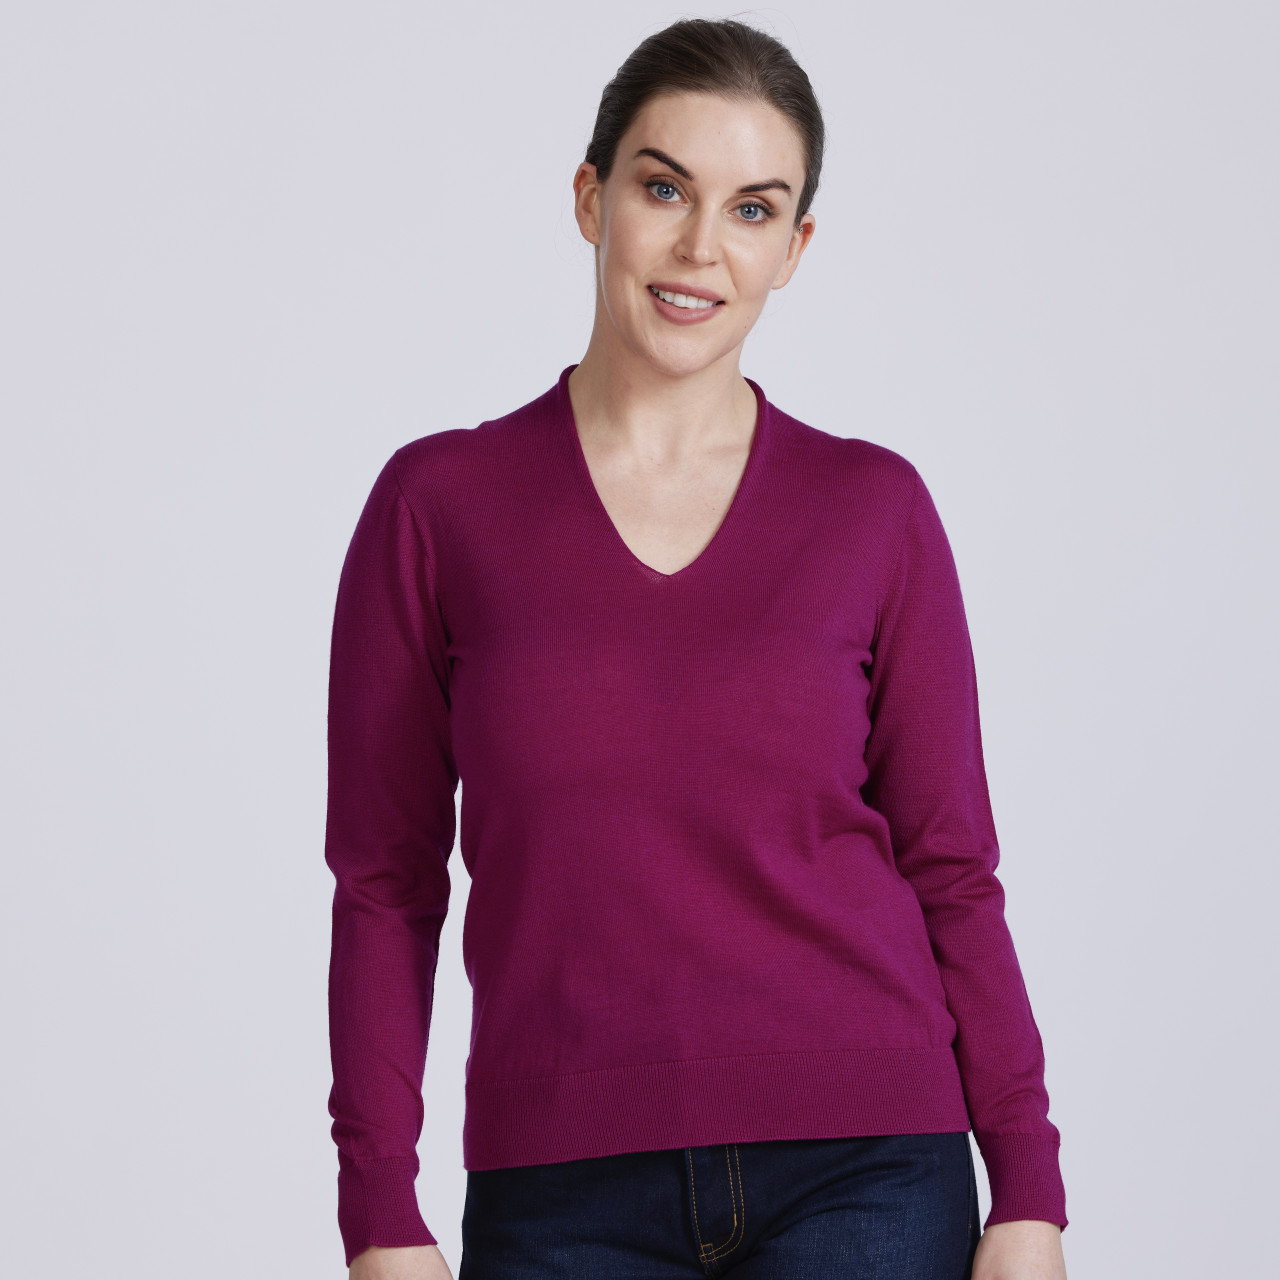 Visage Merino - Classic V Sweater - The Tin Shed